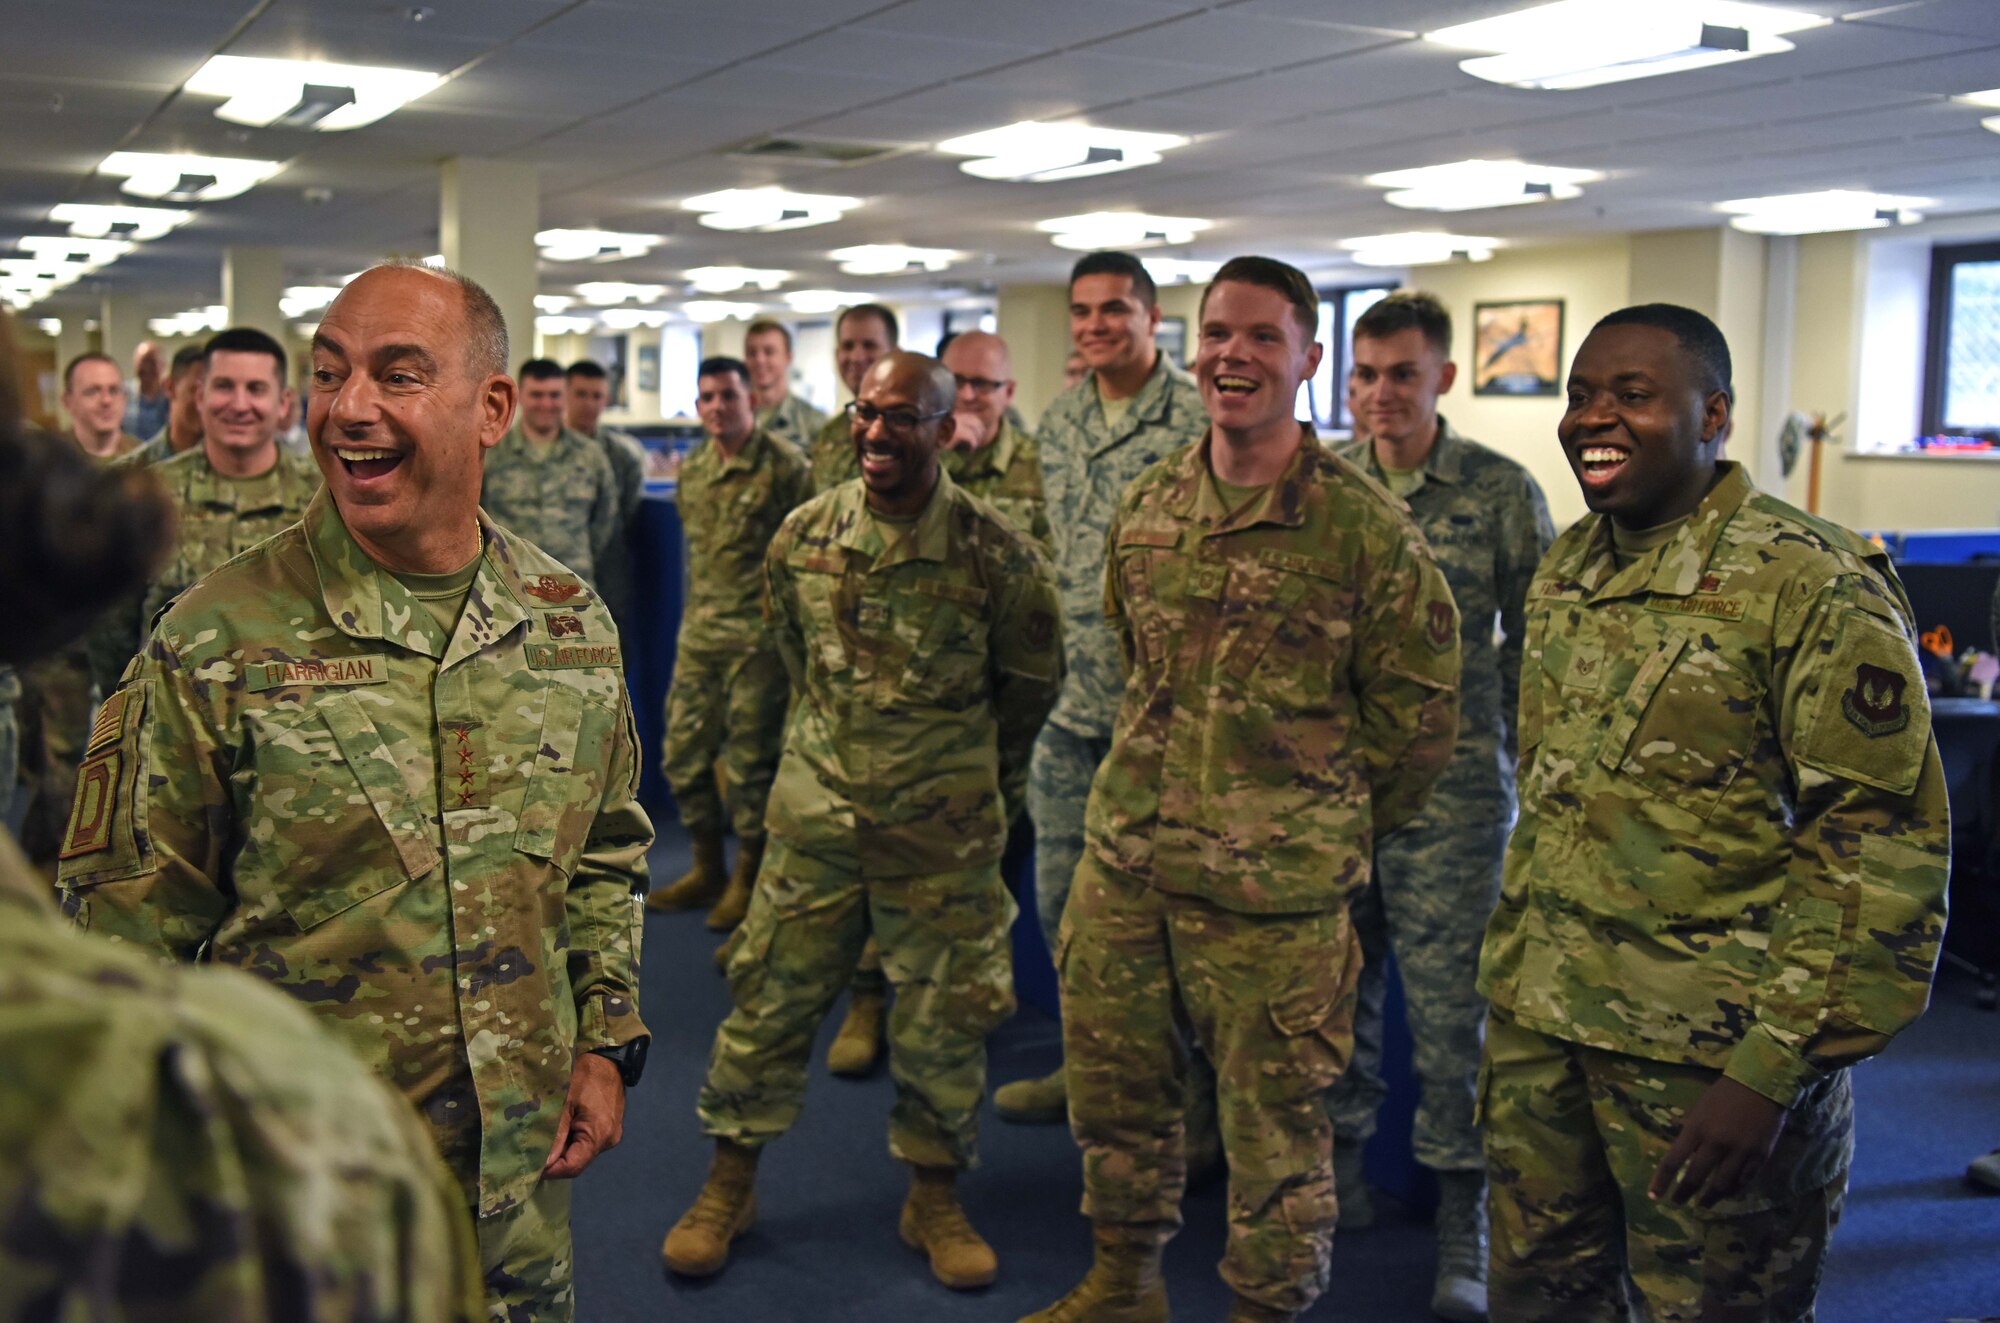 U.S. Air Force Gen. Jeff Harrigian, U.S. Air Forces in Europe – Air Forces Africa commander, shares a laugh with members of the 100th Communications Squadron during his visit to RAF Mildenhall, England, July 15, 2019. During the visit, Harrigian introduced his three priorities as USAFE-AFAFRICA commander – readiness, posture and partnerships. (U.S. Air Force photo by Airman 1st Class Brandon Esau)